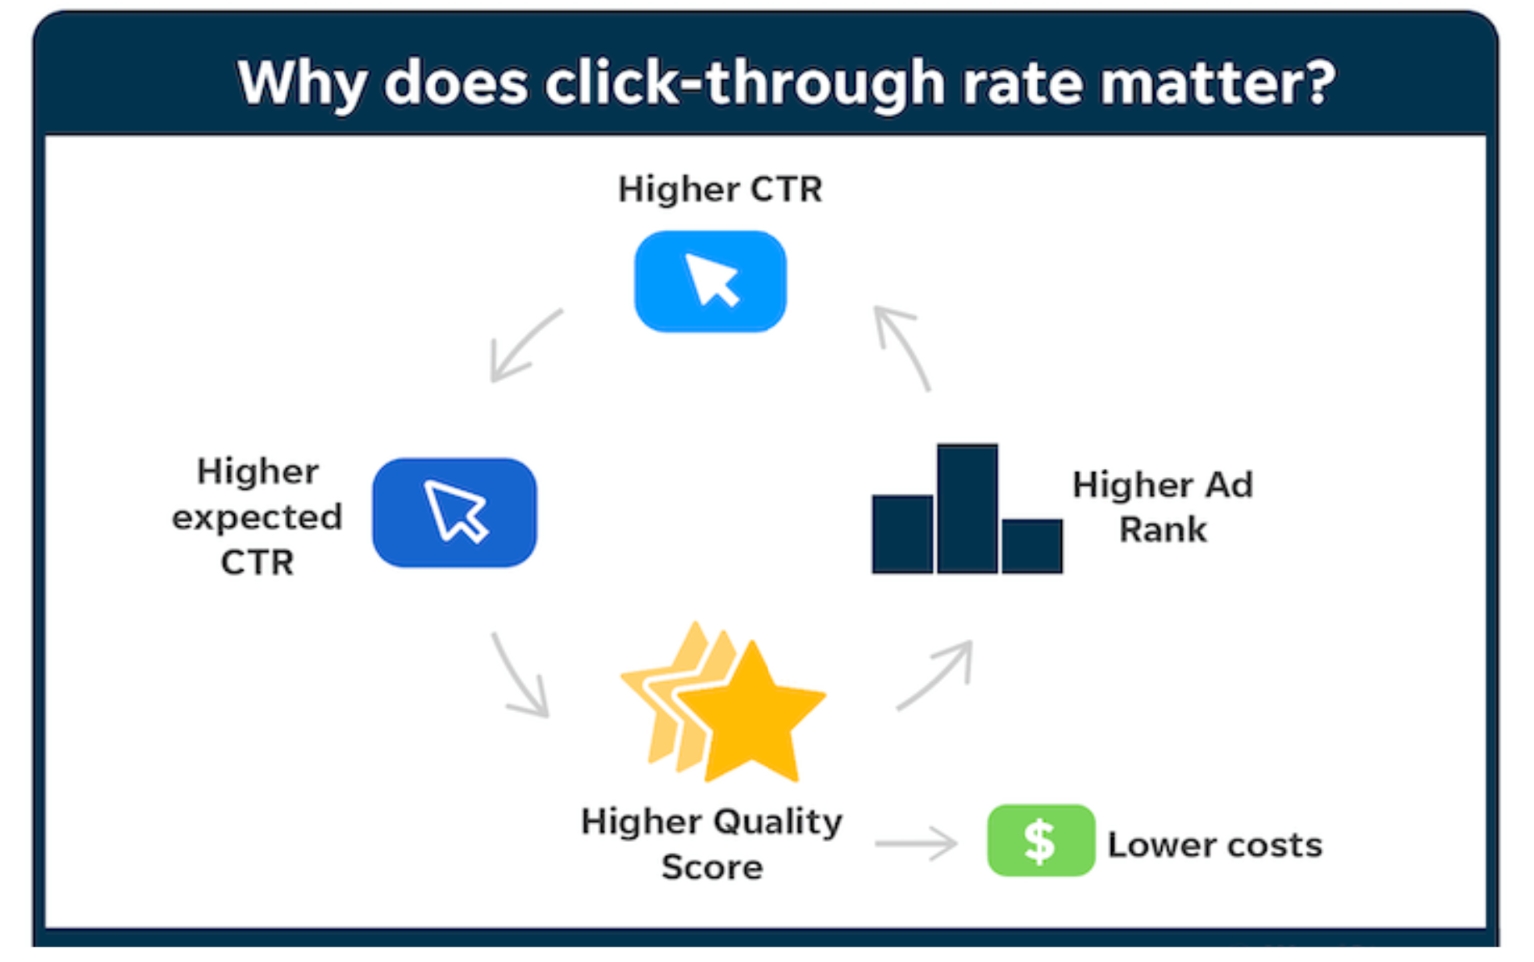 Physio Pros PPC - why does click-through rate matter explanation